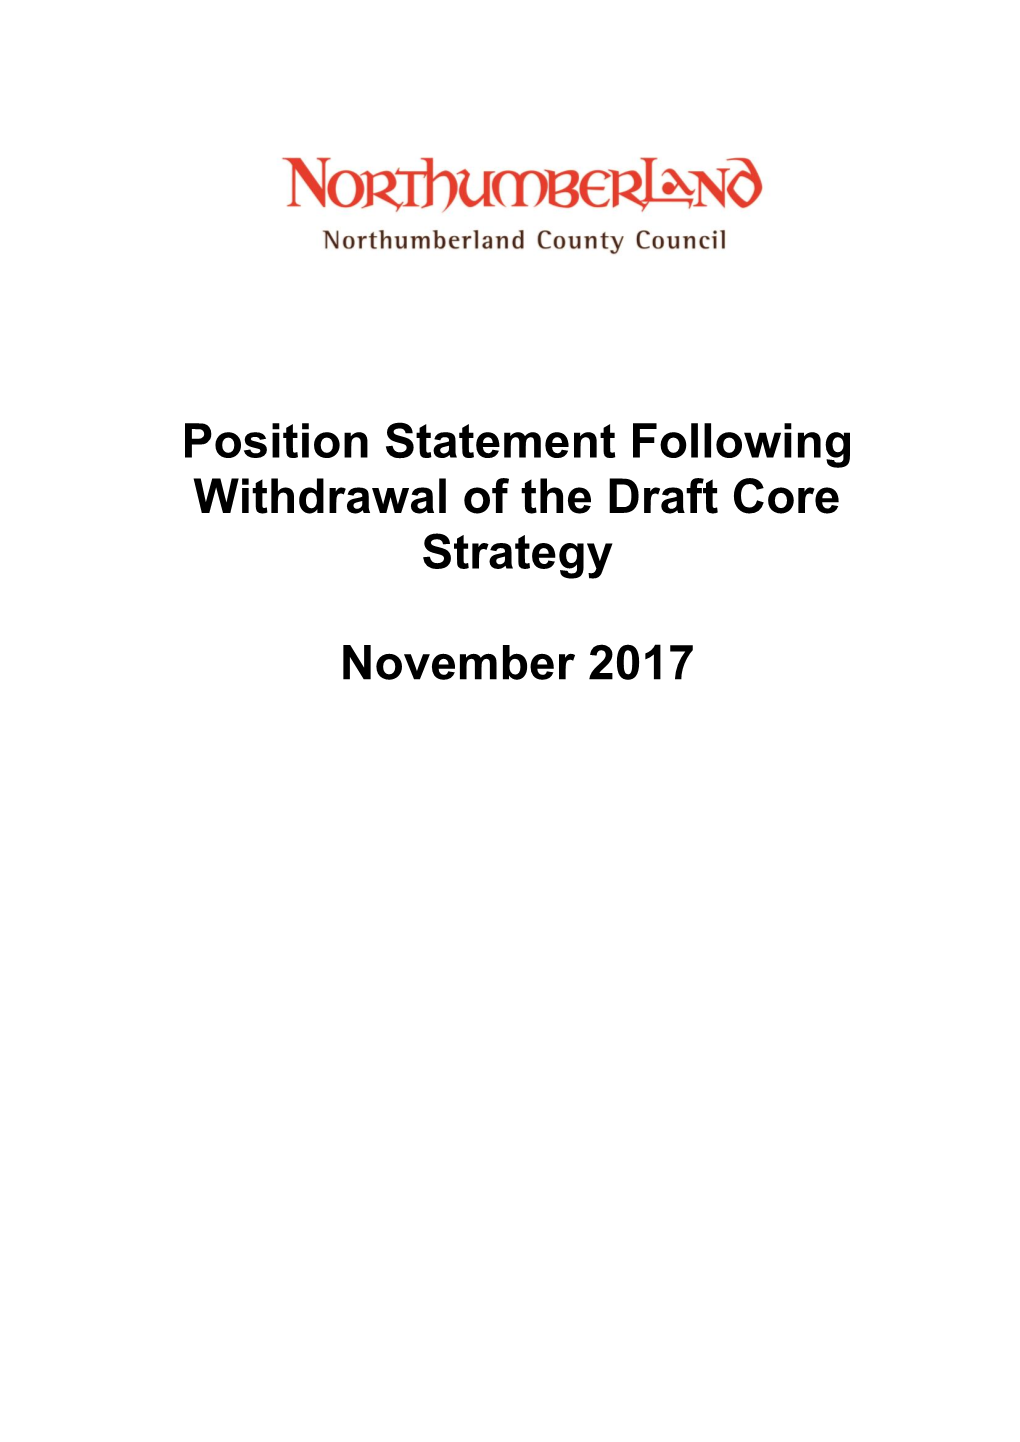 Position Statement Following Withdrawal of the Draft Core Strategy